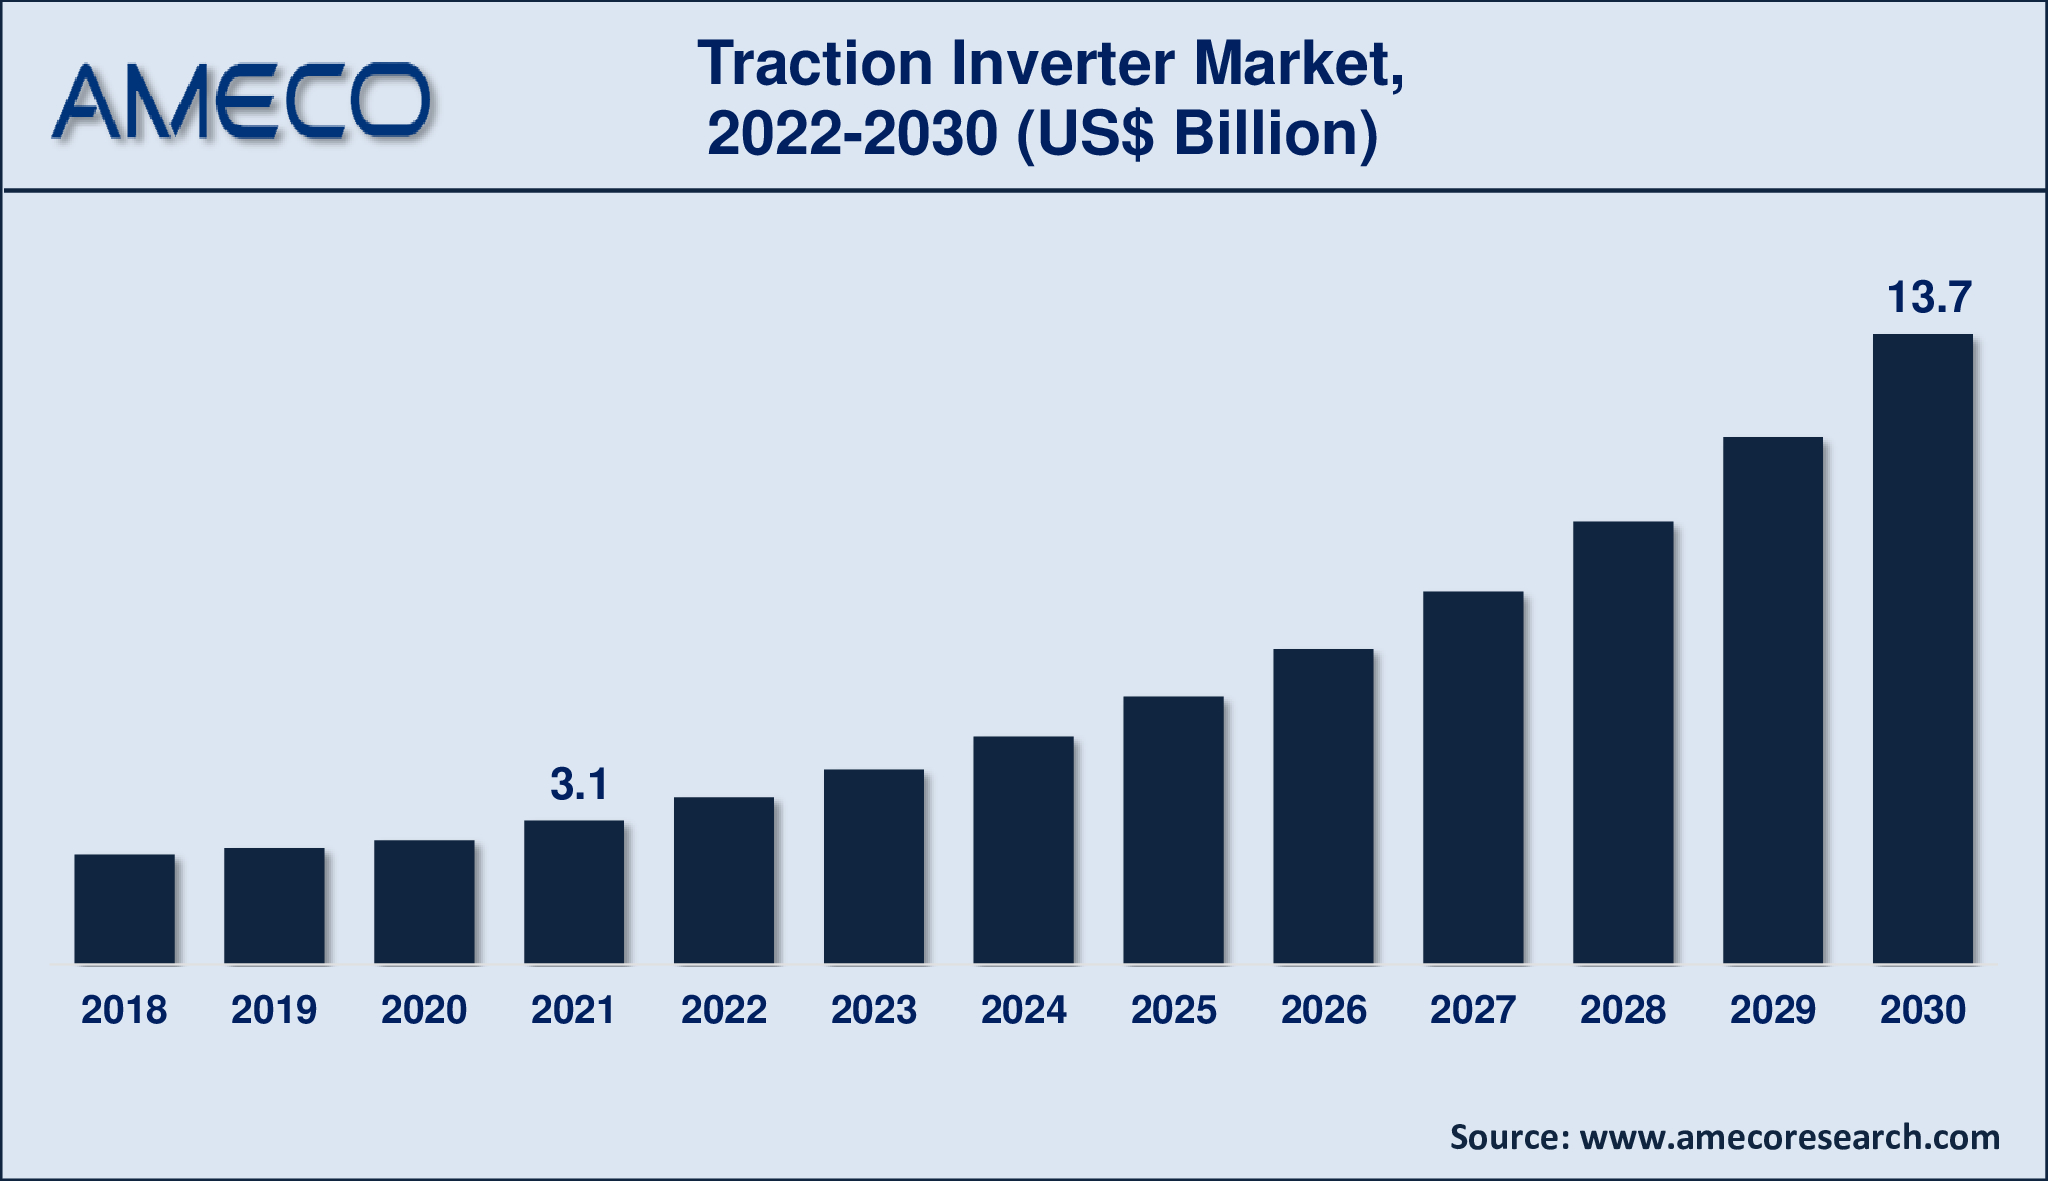 Traction Inverter Market Growth